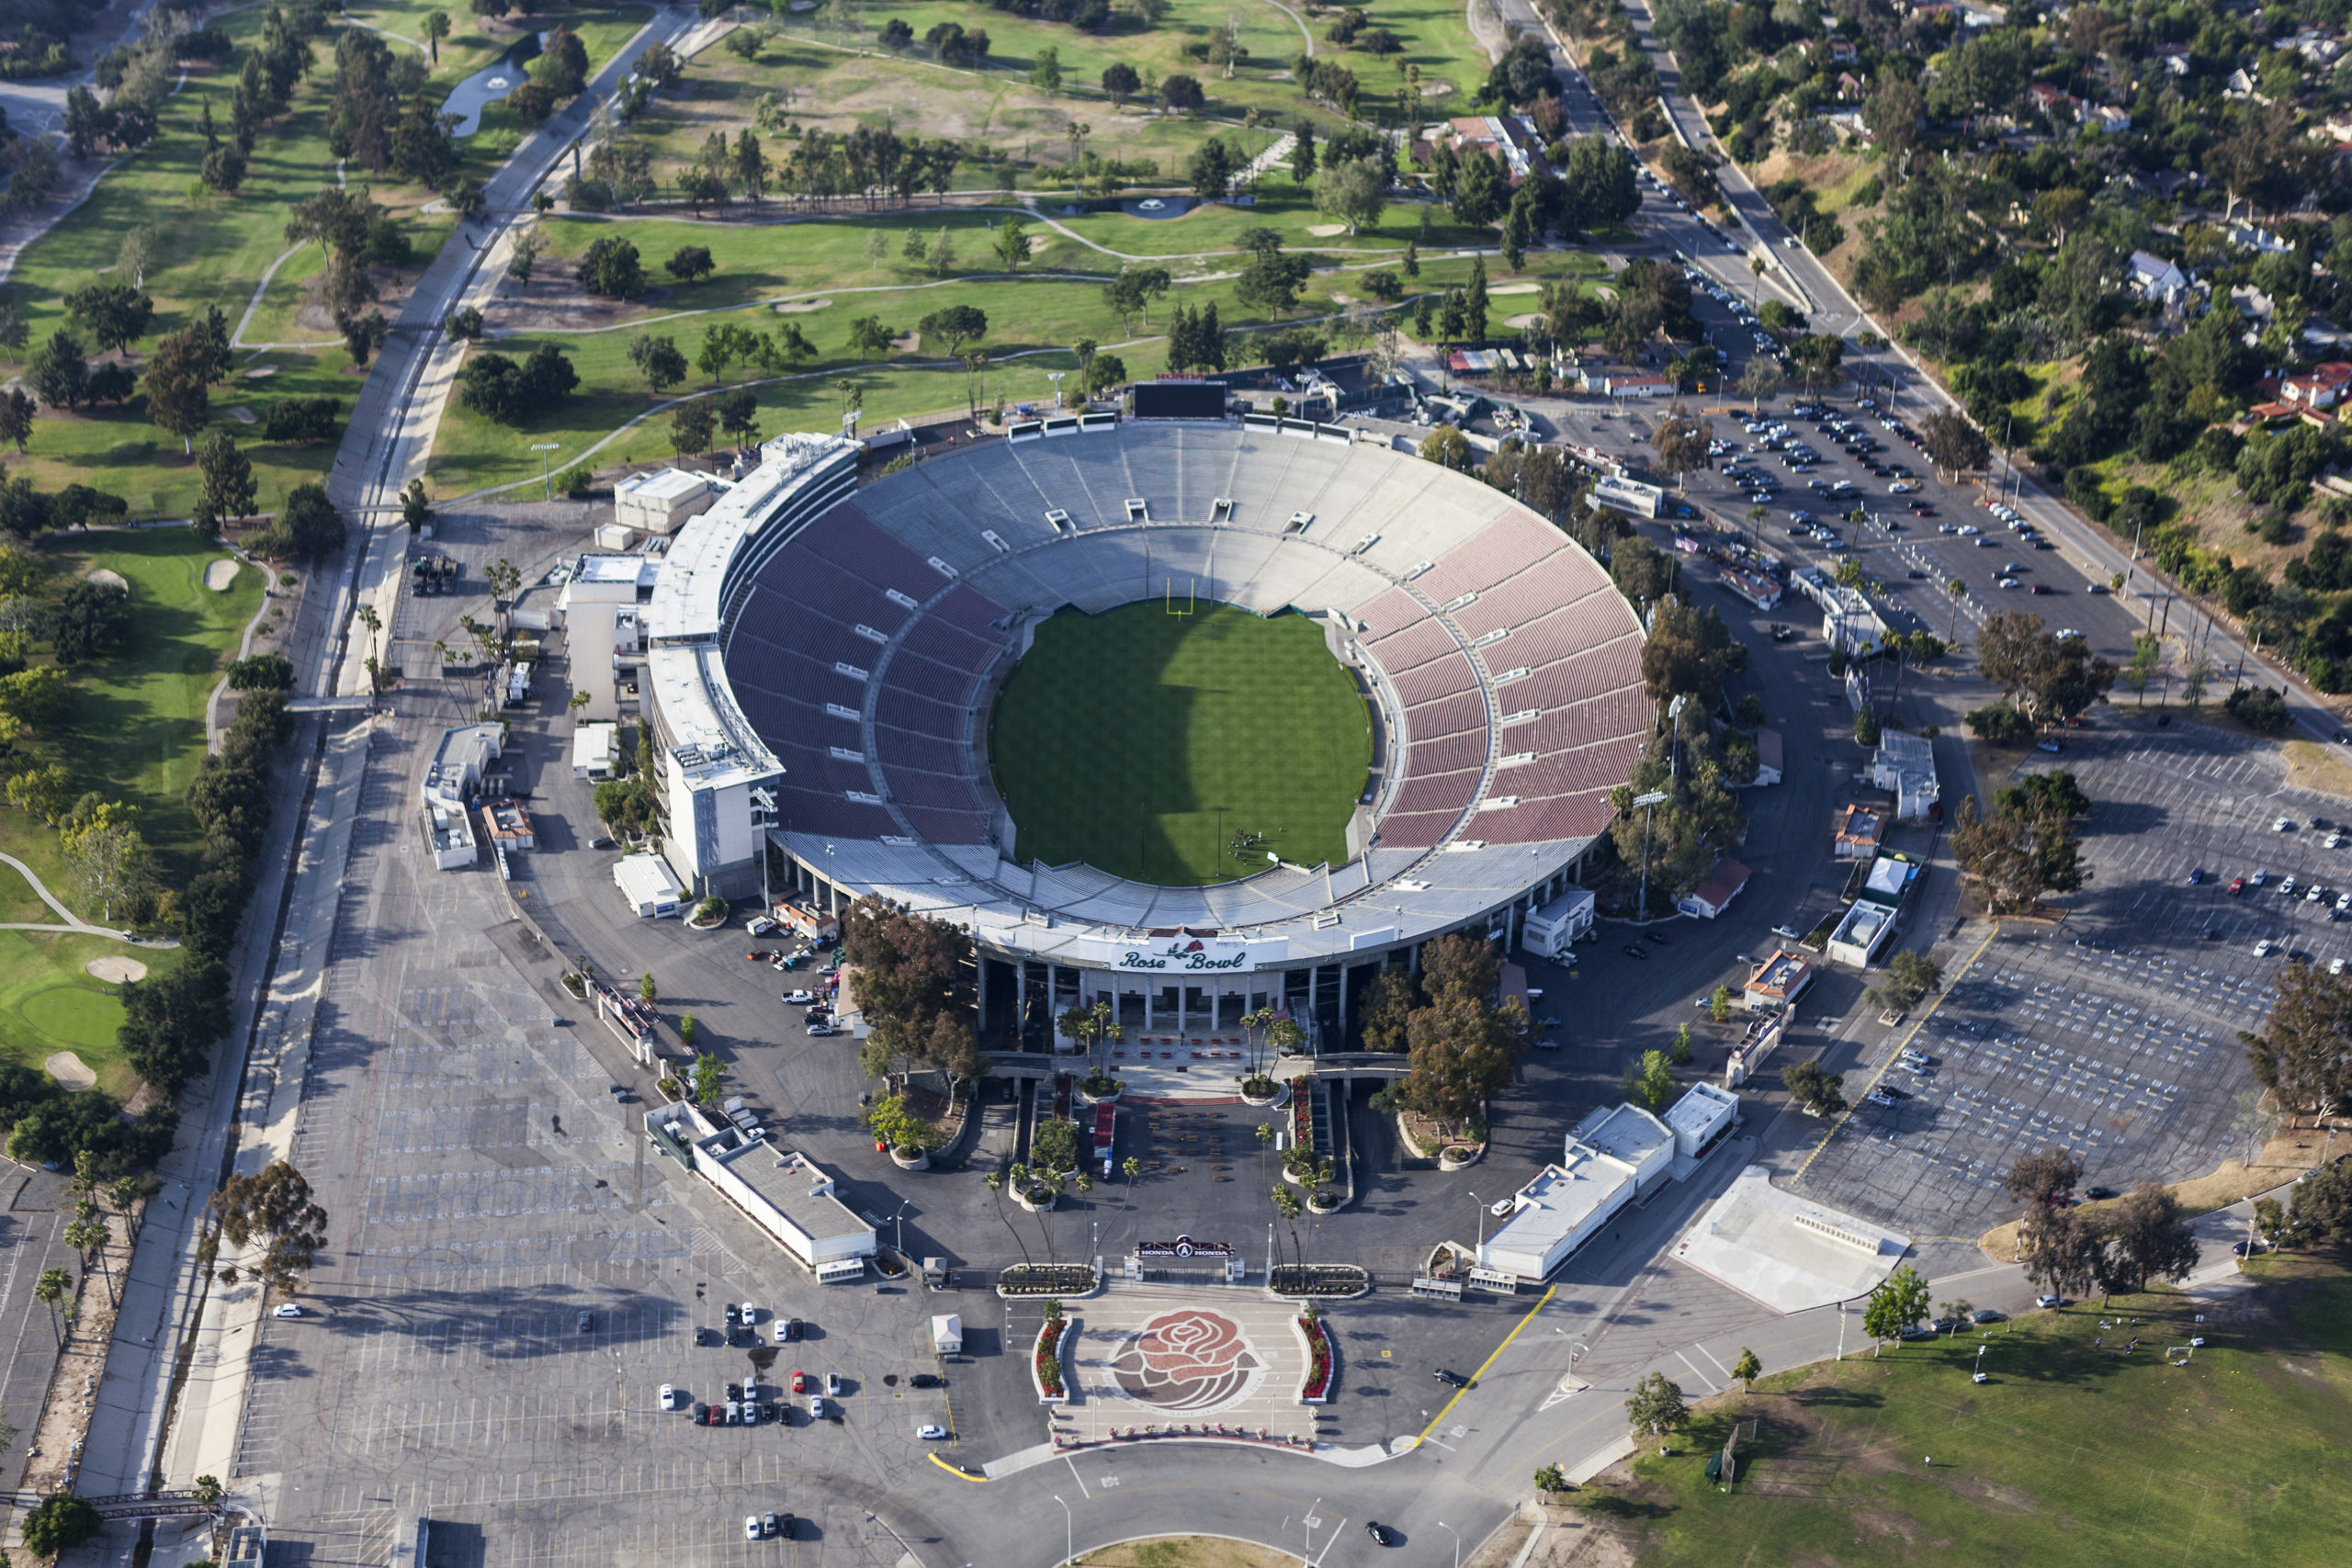 ROSE BOWL College Football Game Retains Name During Texas Move The South Pasadenan South